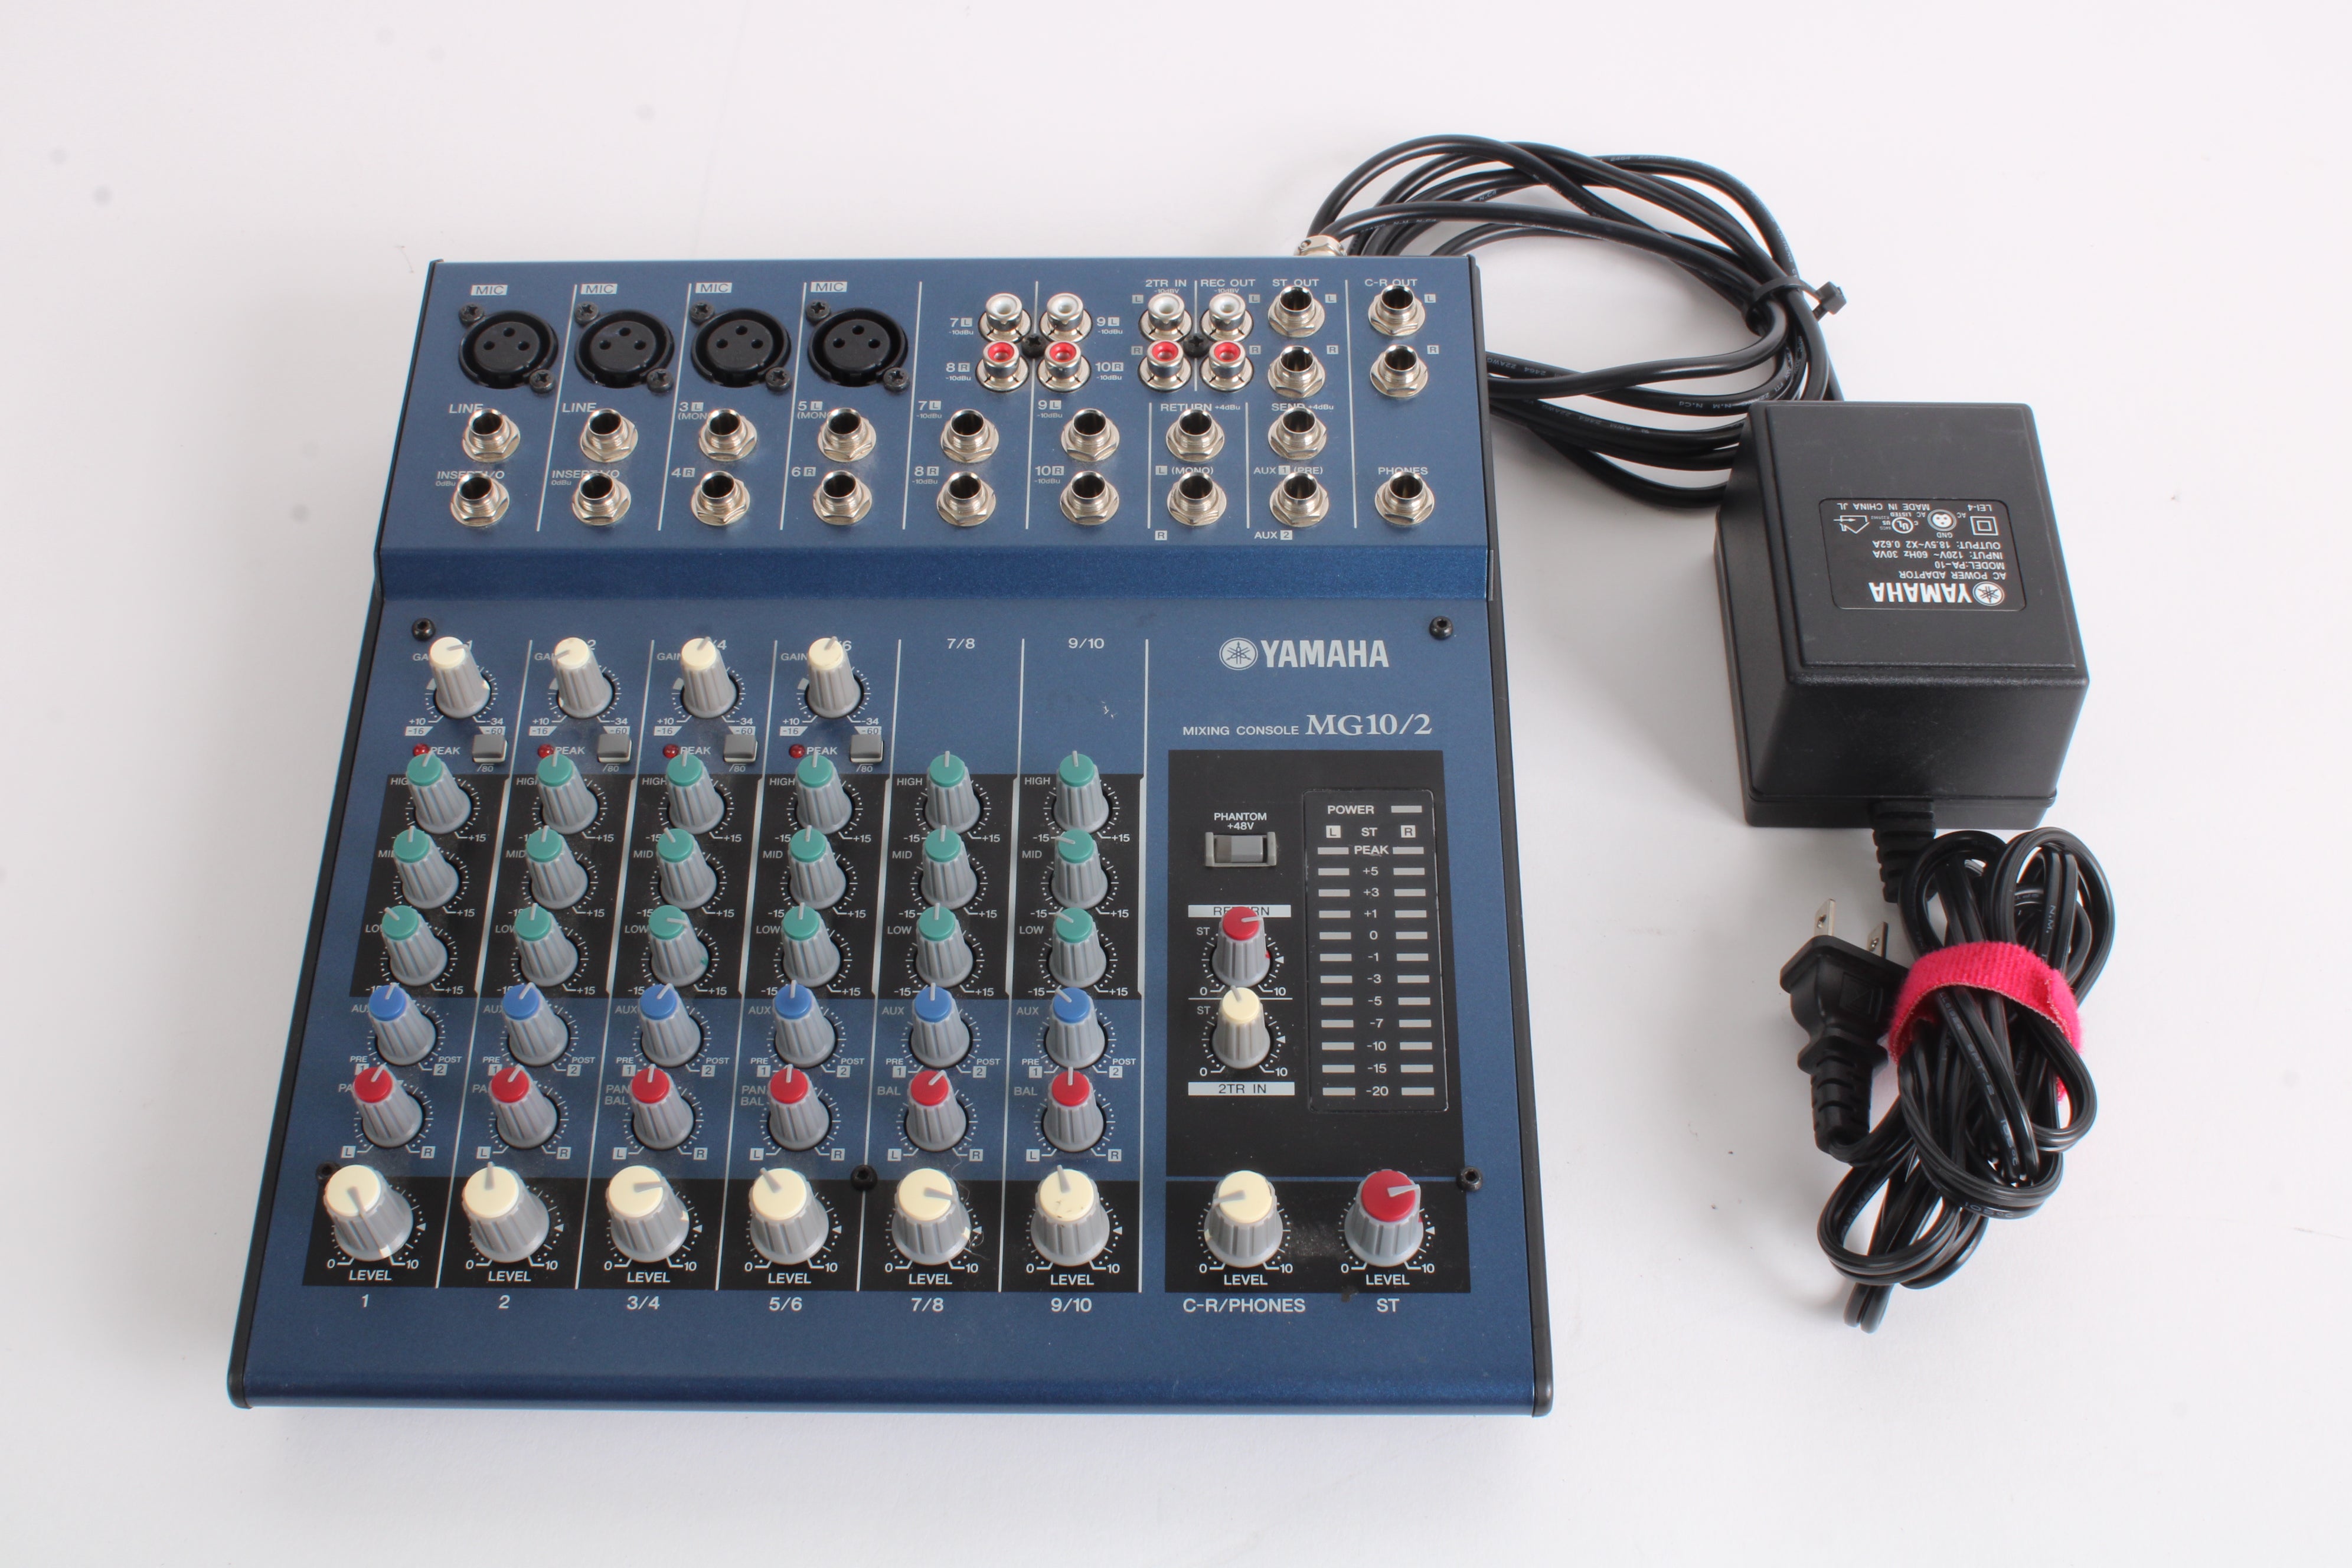 Yamaha MG10/2 10 Channel Stereo Mixing Console Mixer With Power Supply